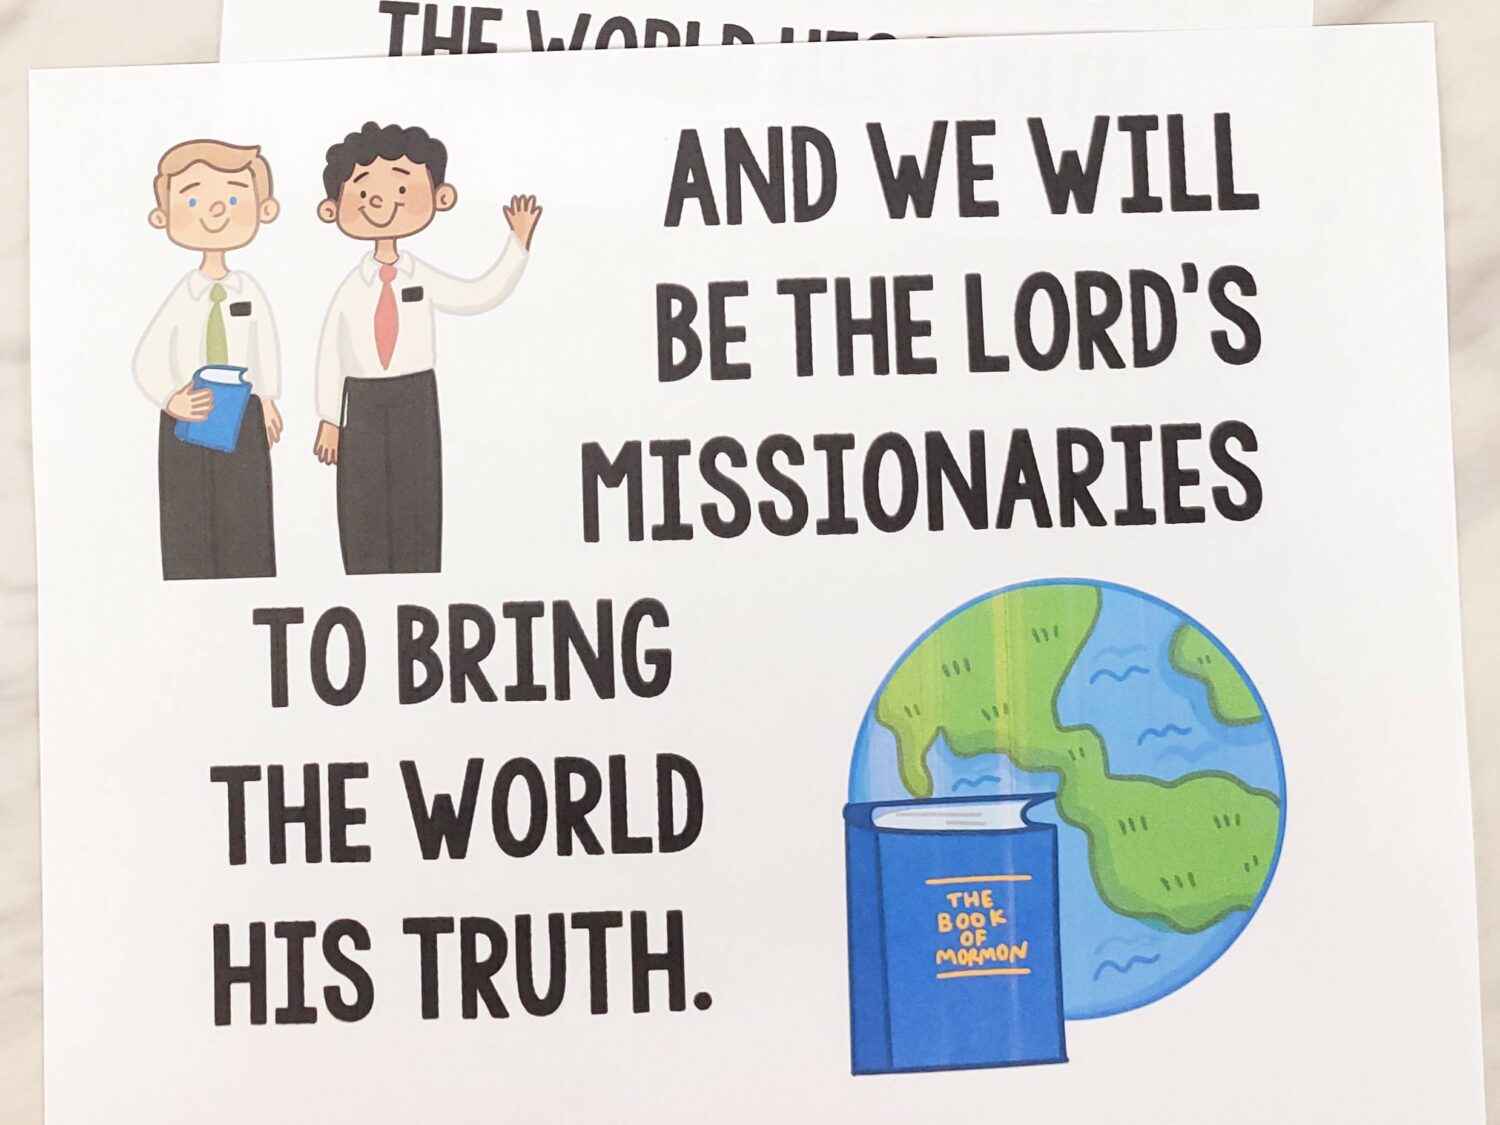 We'll Bring the World His Truth Flip chart for Primary Singing Time pictures and lyrics to help you teach this song to the Primary children! A printable resource for LDS Primary music leaders.